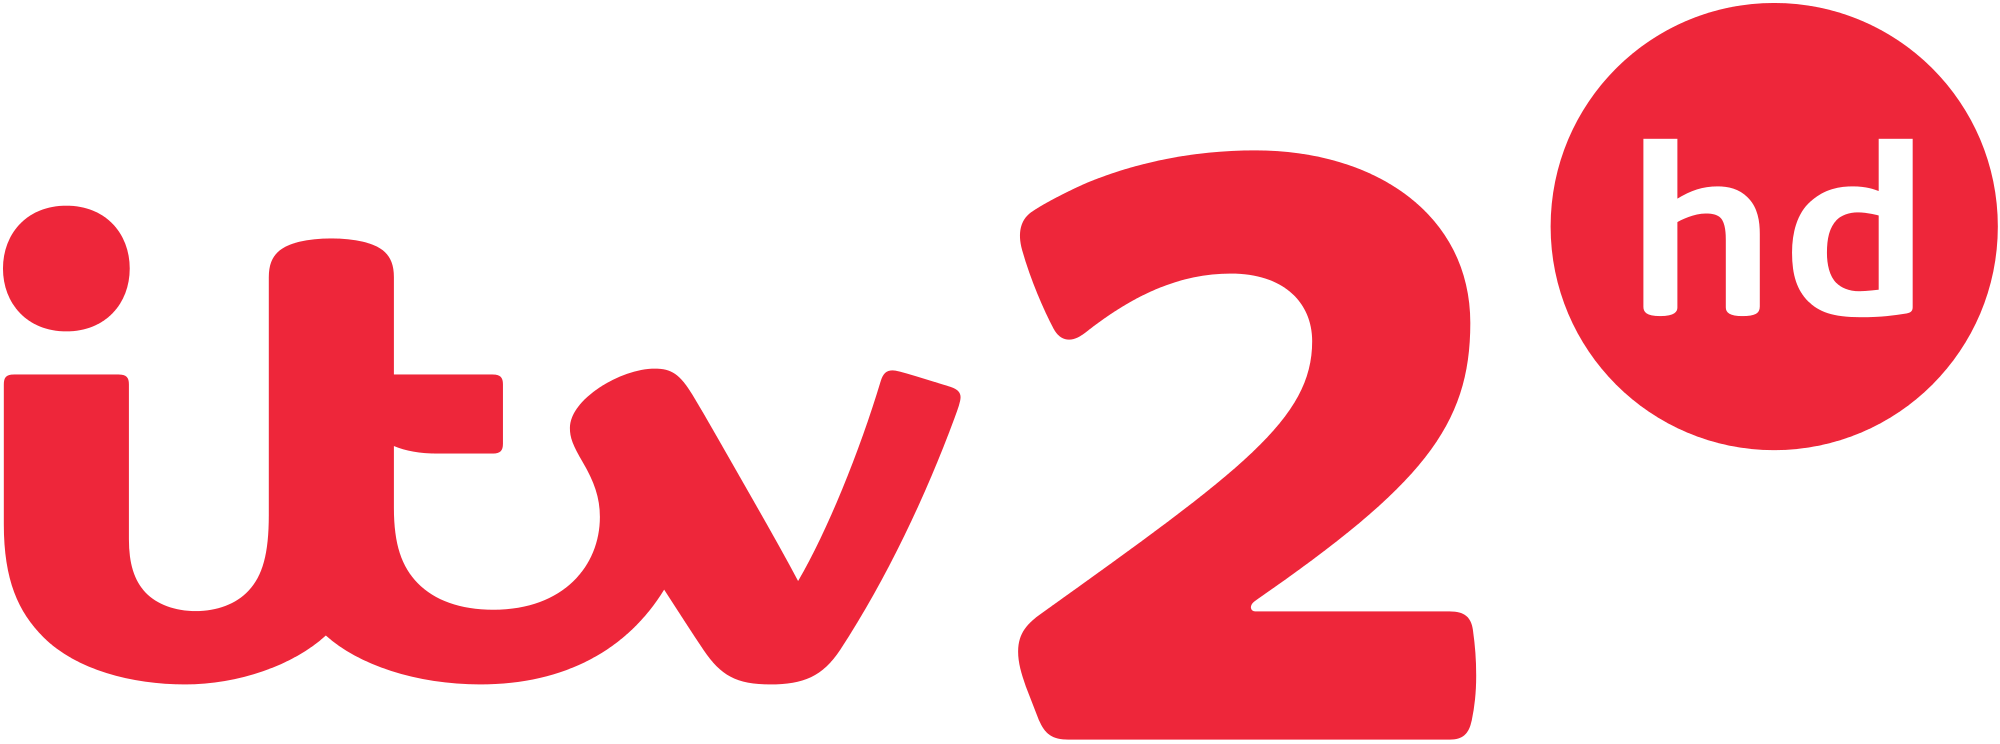 Itv2 Hd Logo 2013 Svg.png   Itv2 Hd Png - Itv2 Vector, Transparent background PNG HD thumbnail